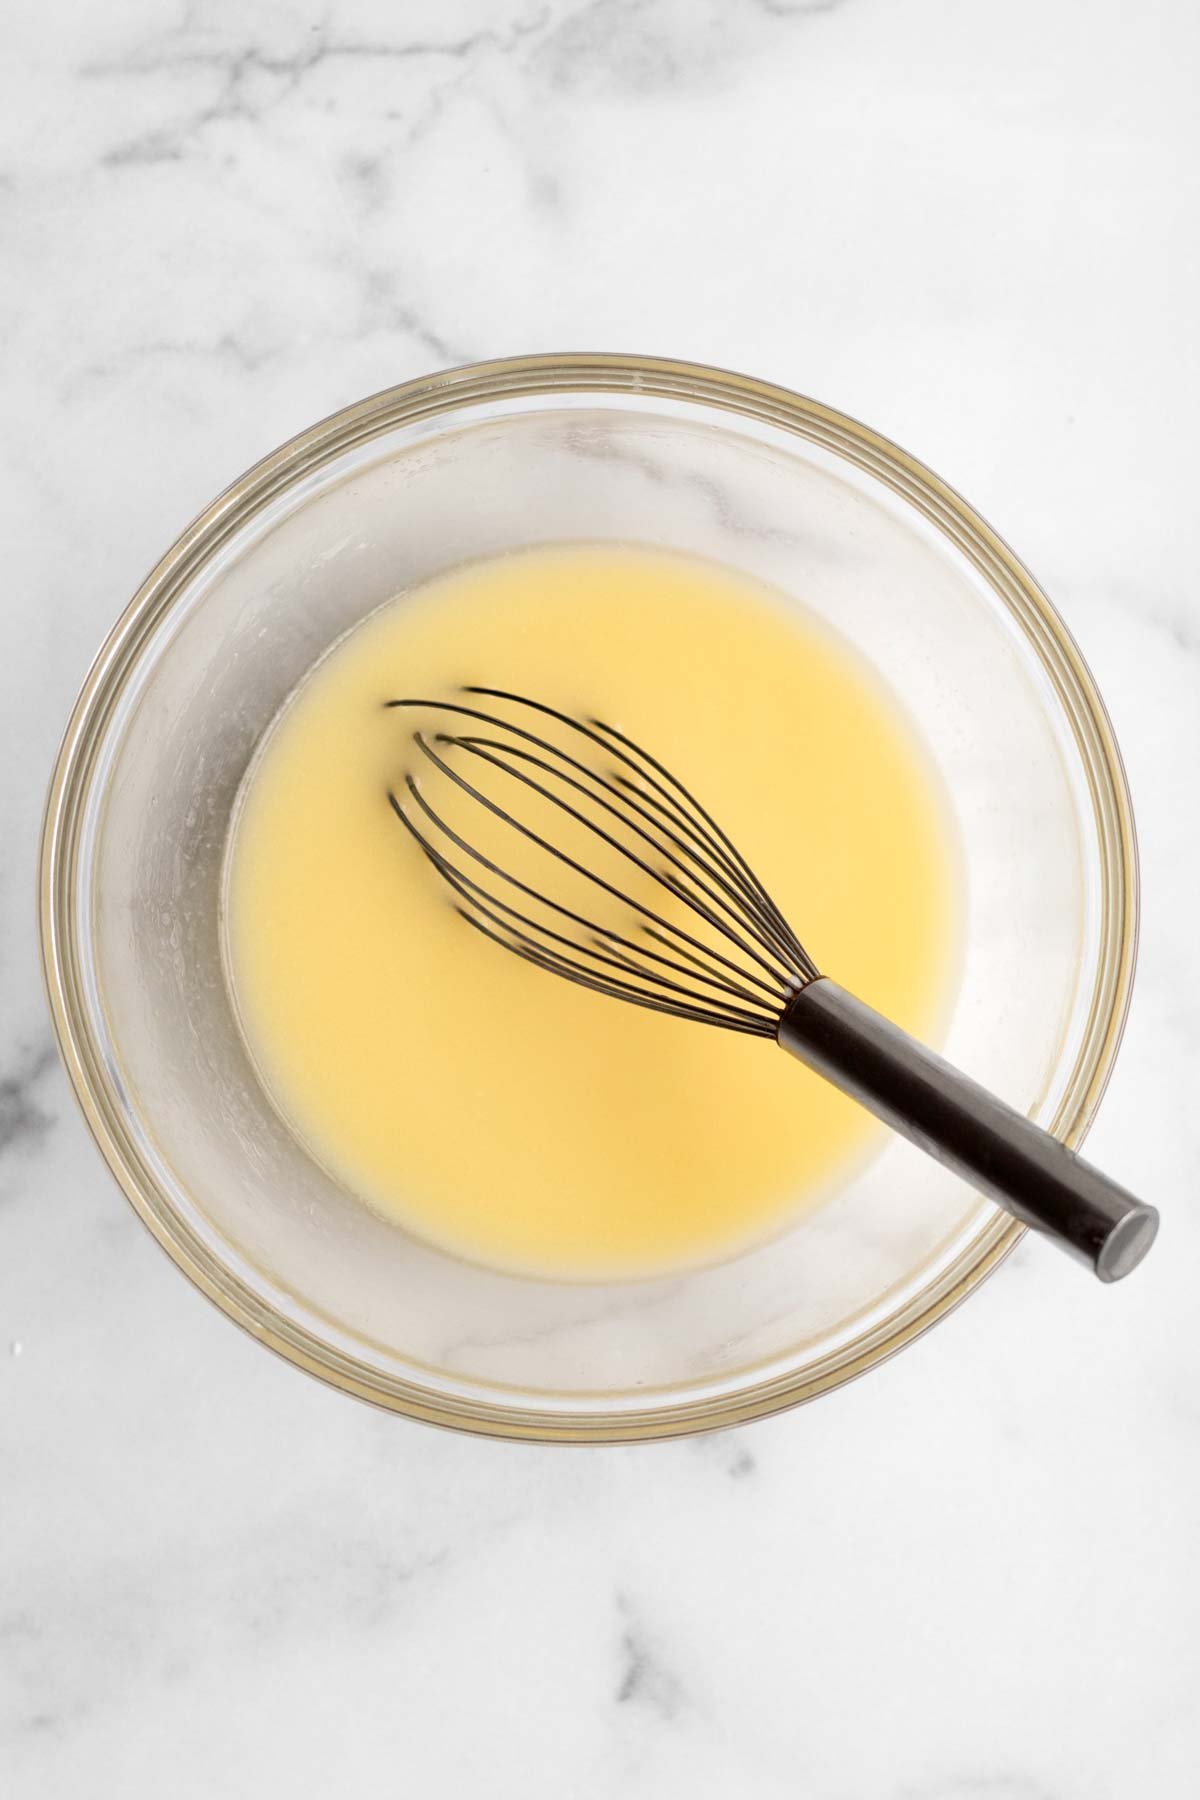 Yellow melted butter in a bowl.